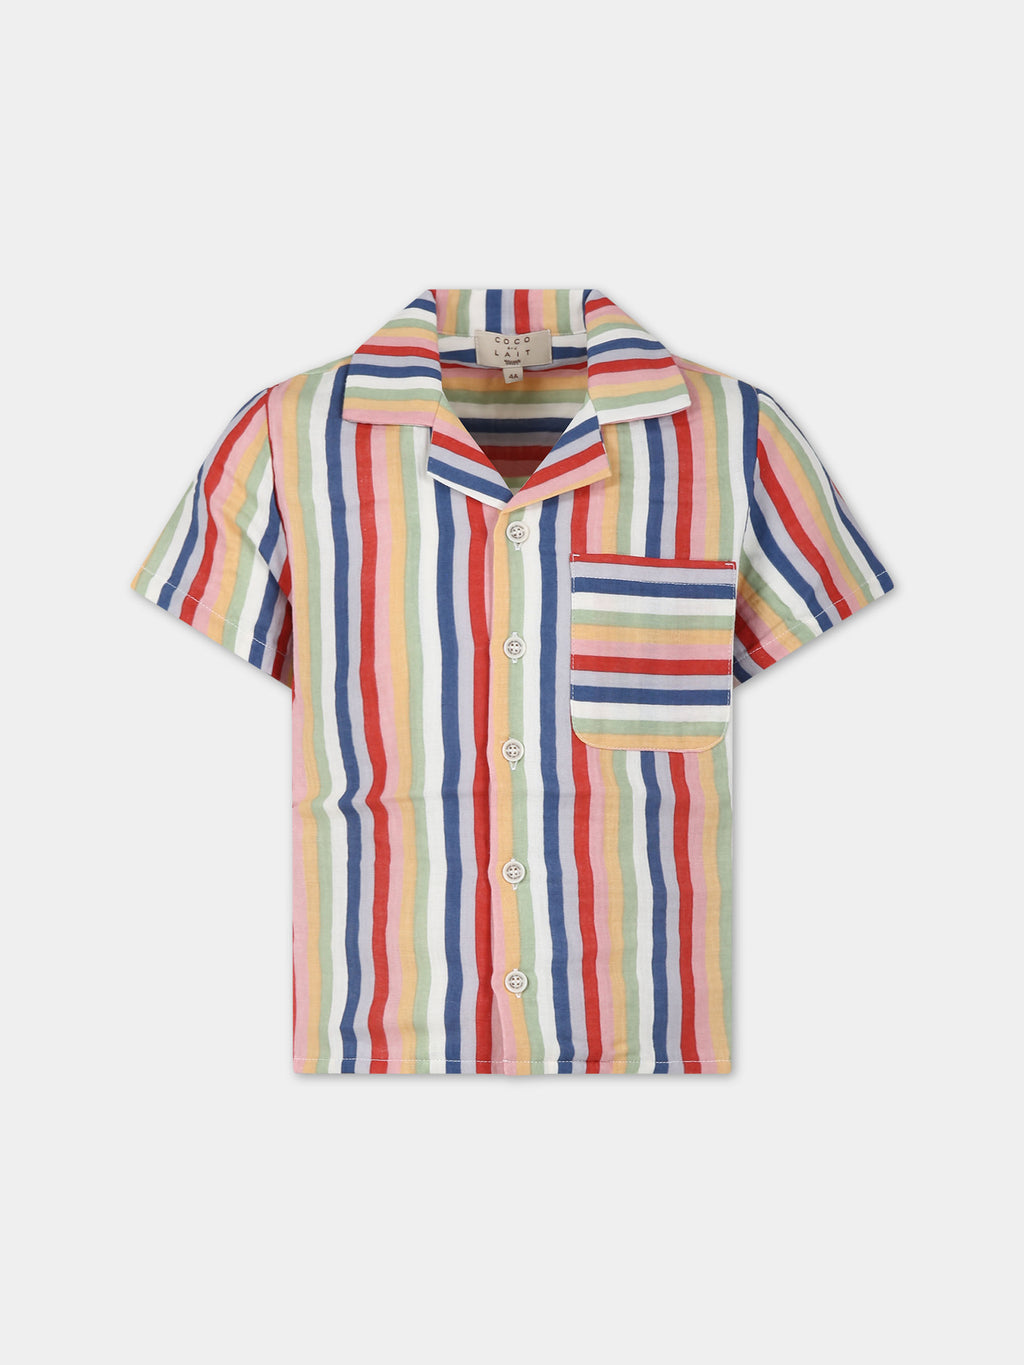 Multicolor shirt for kids with stripes pattern